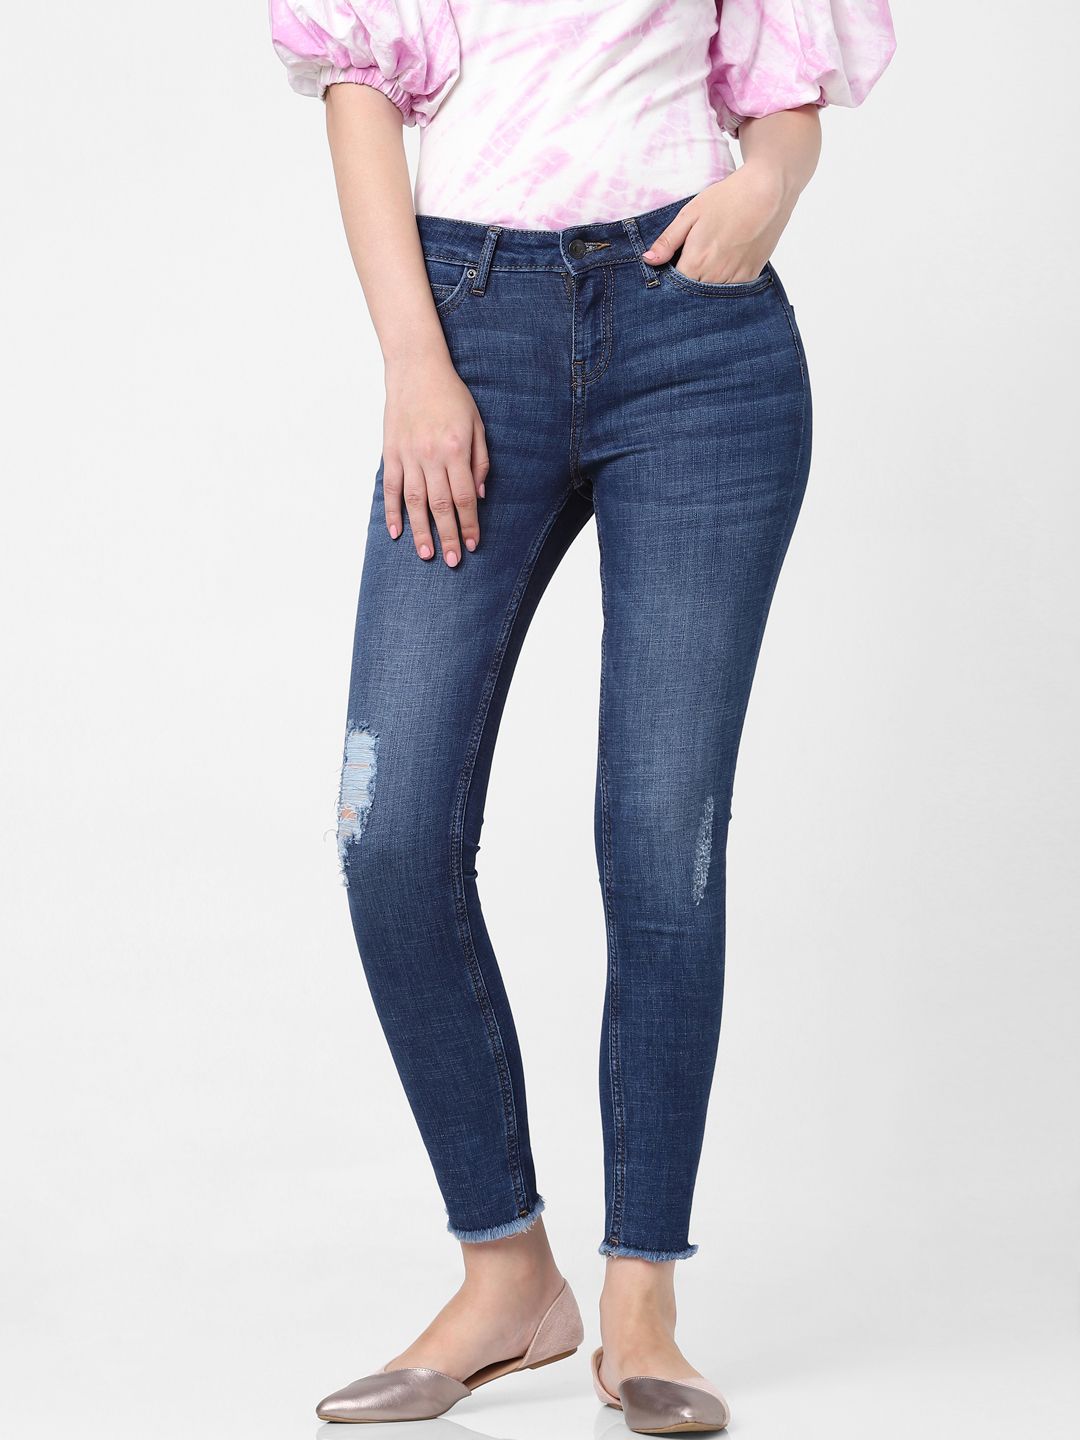 Vero Moda Women Blue Skinny Fit Mildly Distressed Light Fade Mid-Rise Stretchable Jeans Price in India